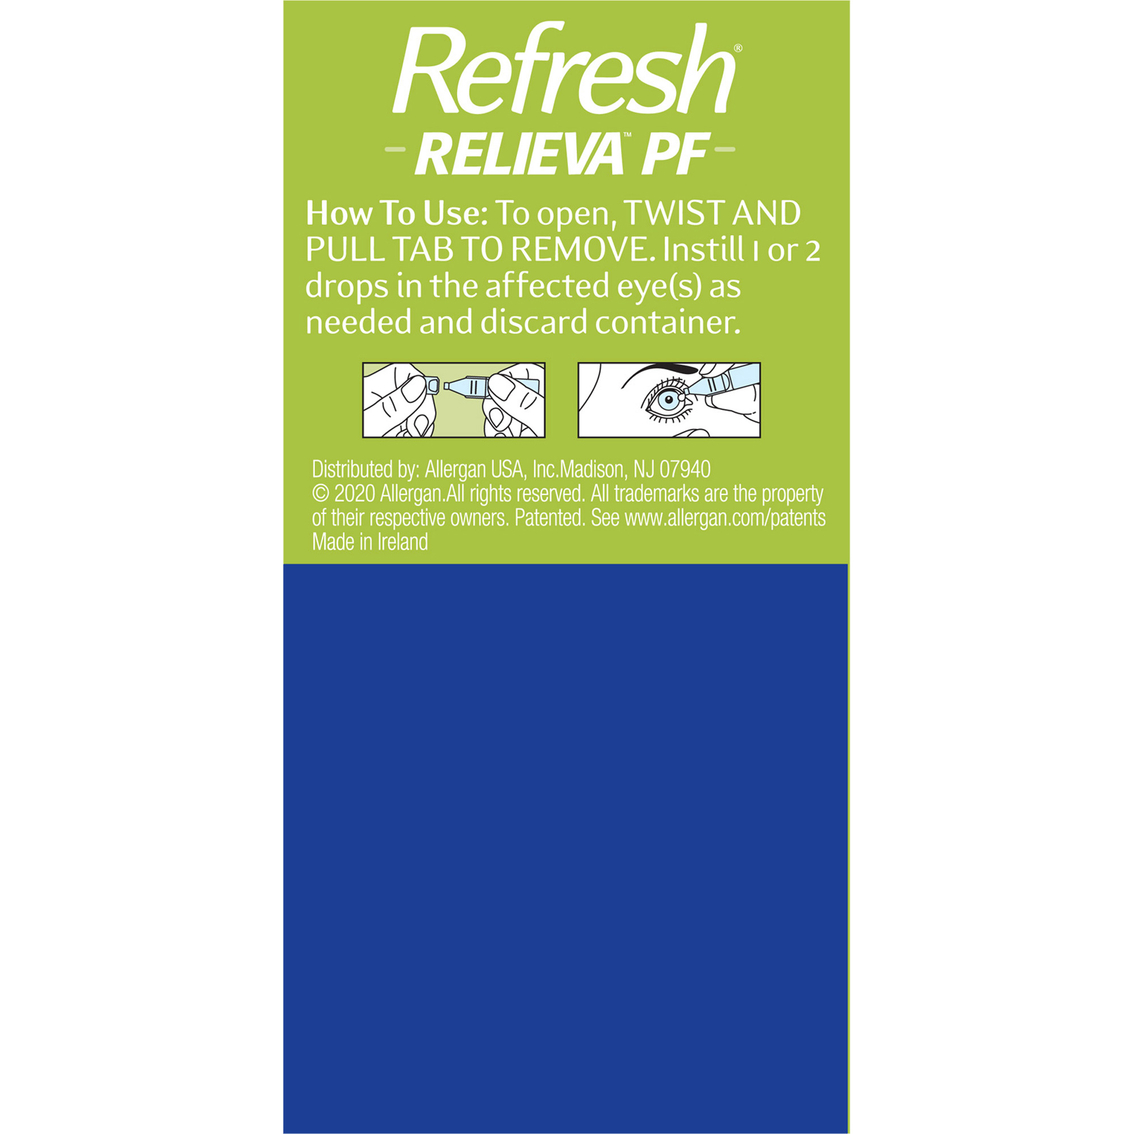 Refresh Relieva Preservative Free Lubricant Eye Drops 30 ct. - Image 5 of 5